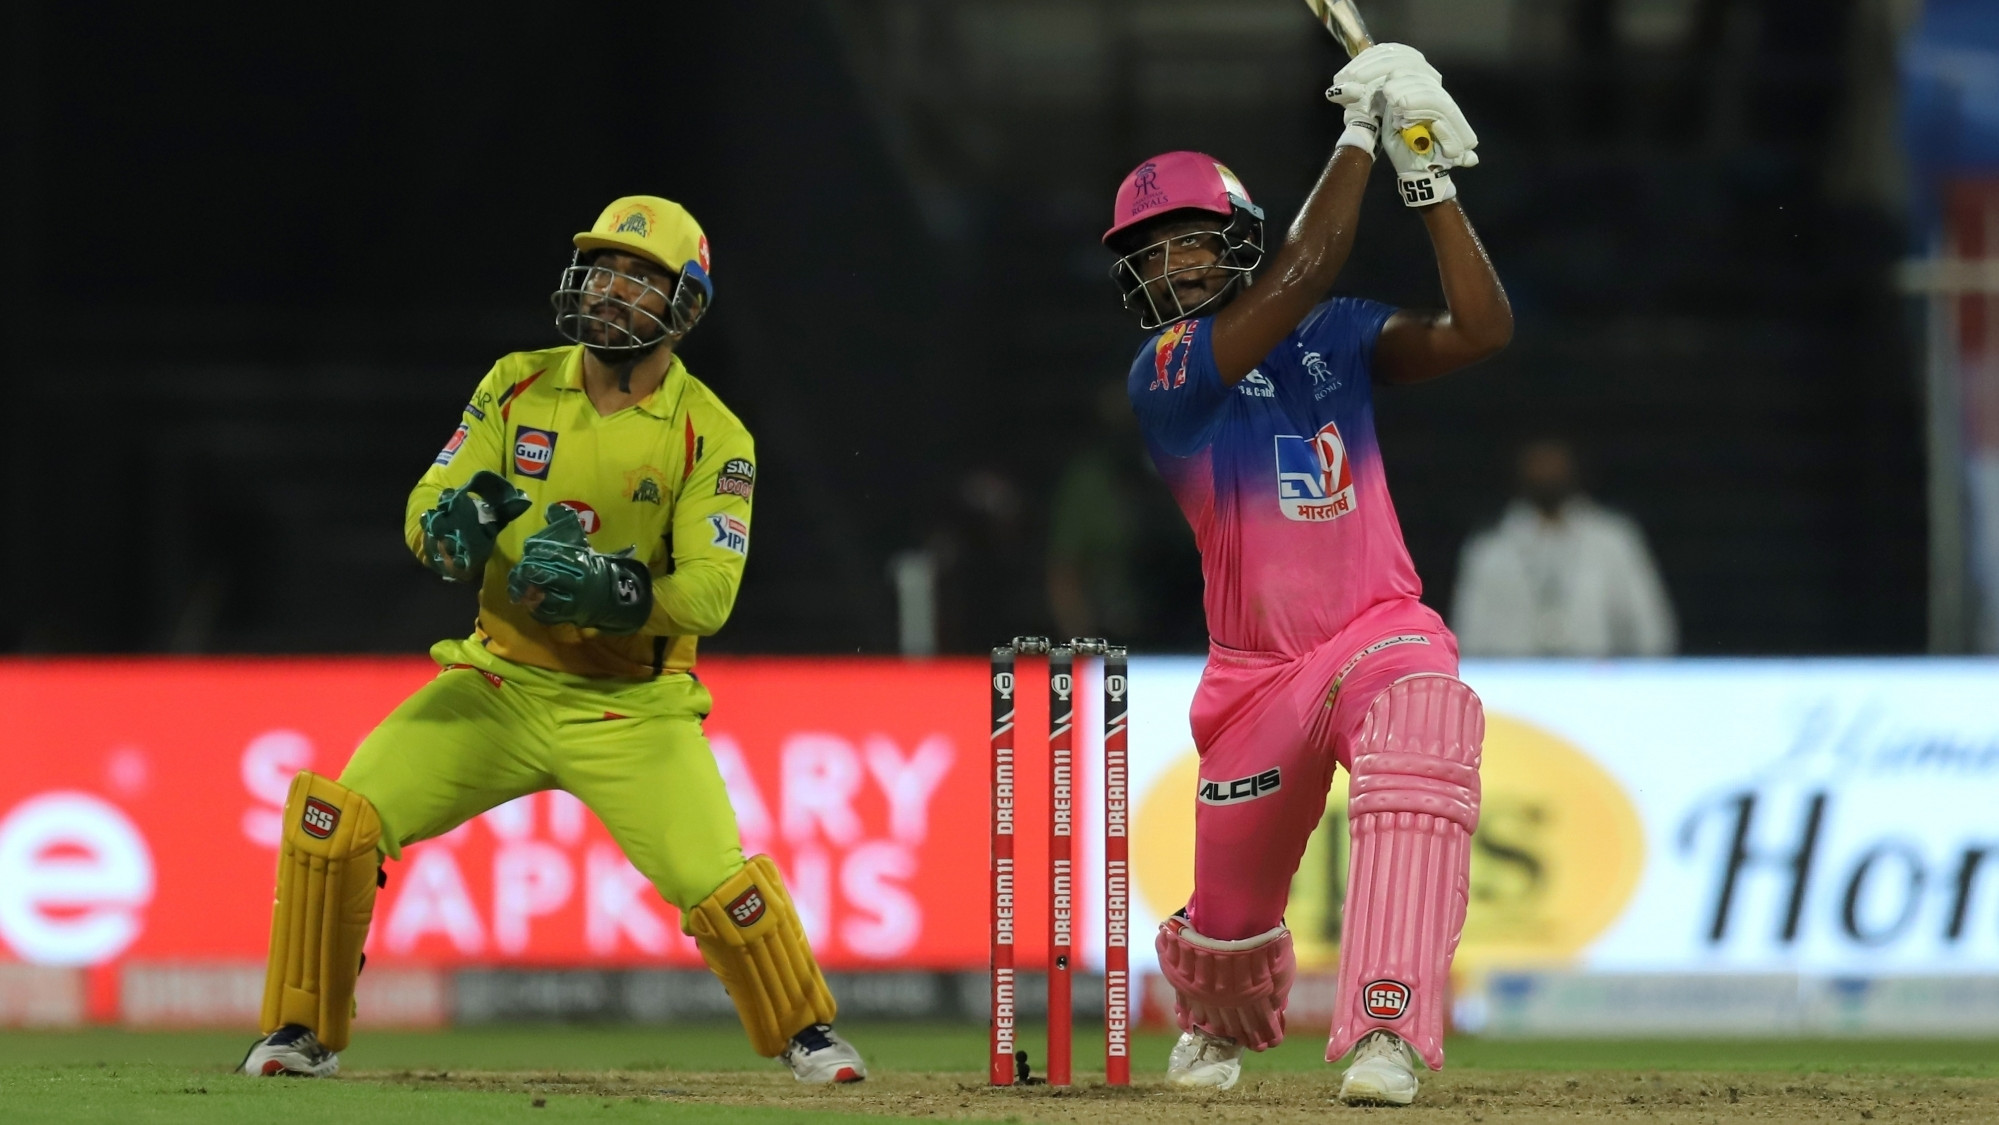 IPL 2021: “Don't think anyone can be like MS Dhoni”, Sanju Samson rejects comparisons with CSK skipper